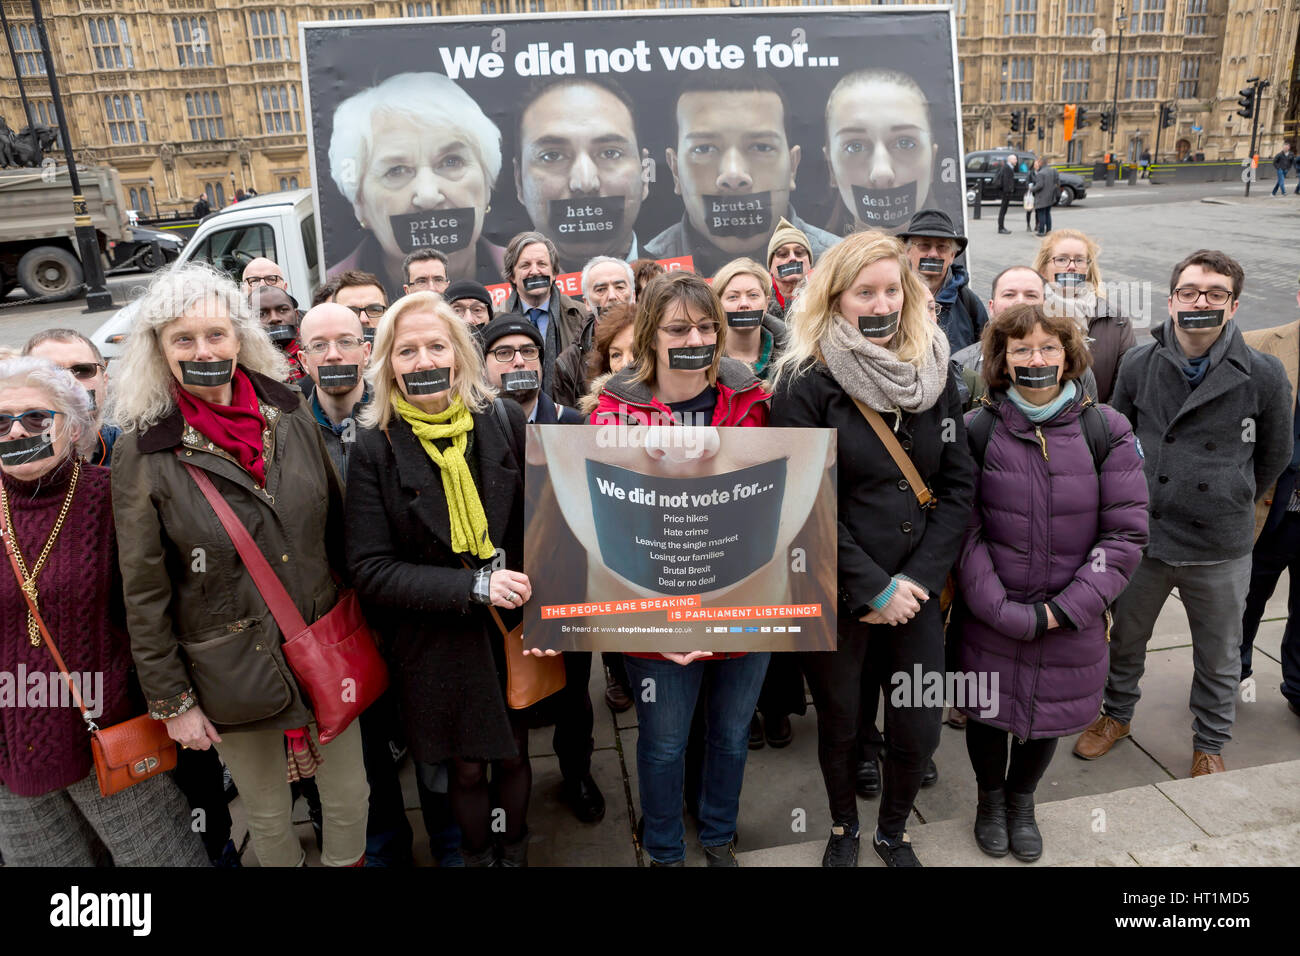 Stop the Silence. A campaign was launched in London to speak up for the ...